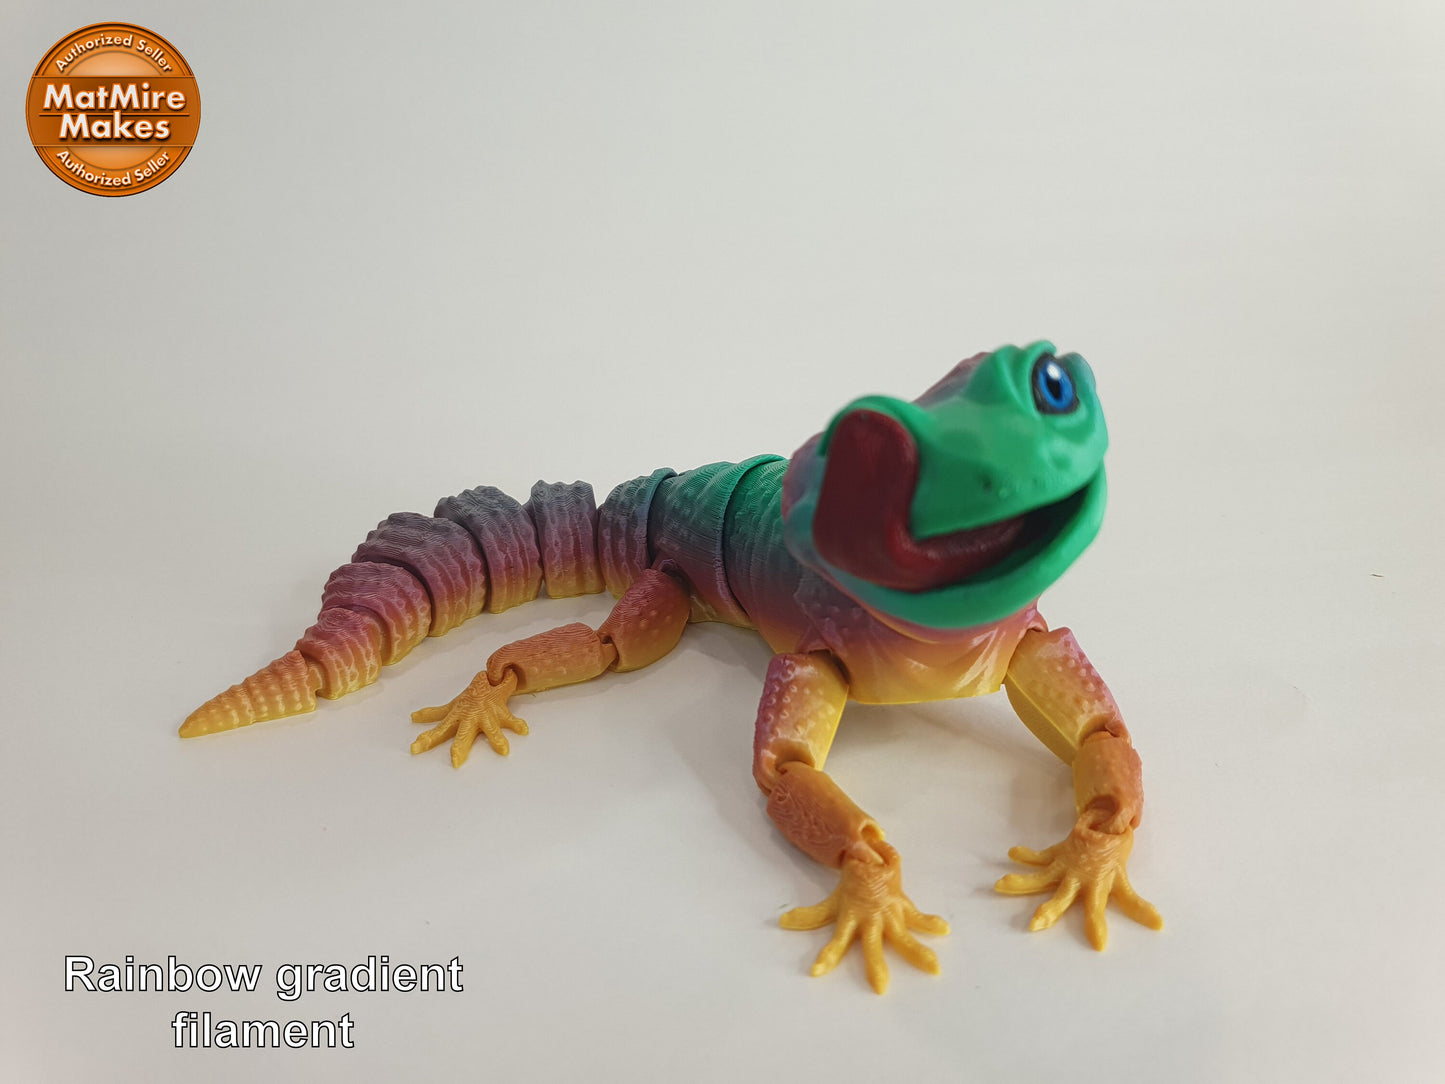 Licky Leo Leopard Gecko - Articulated Flexible 3D Print - Professionally Hand painted finishing details, can be printed any colour you like!